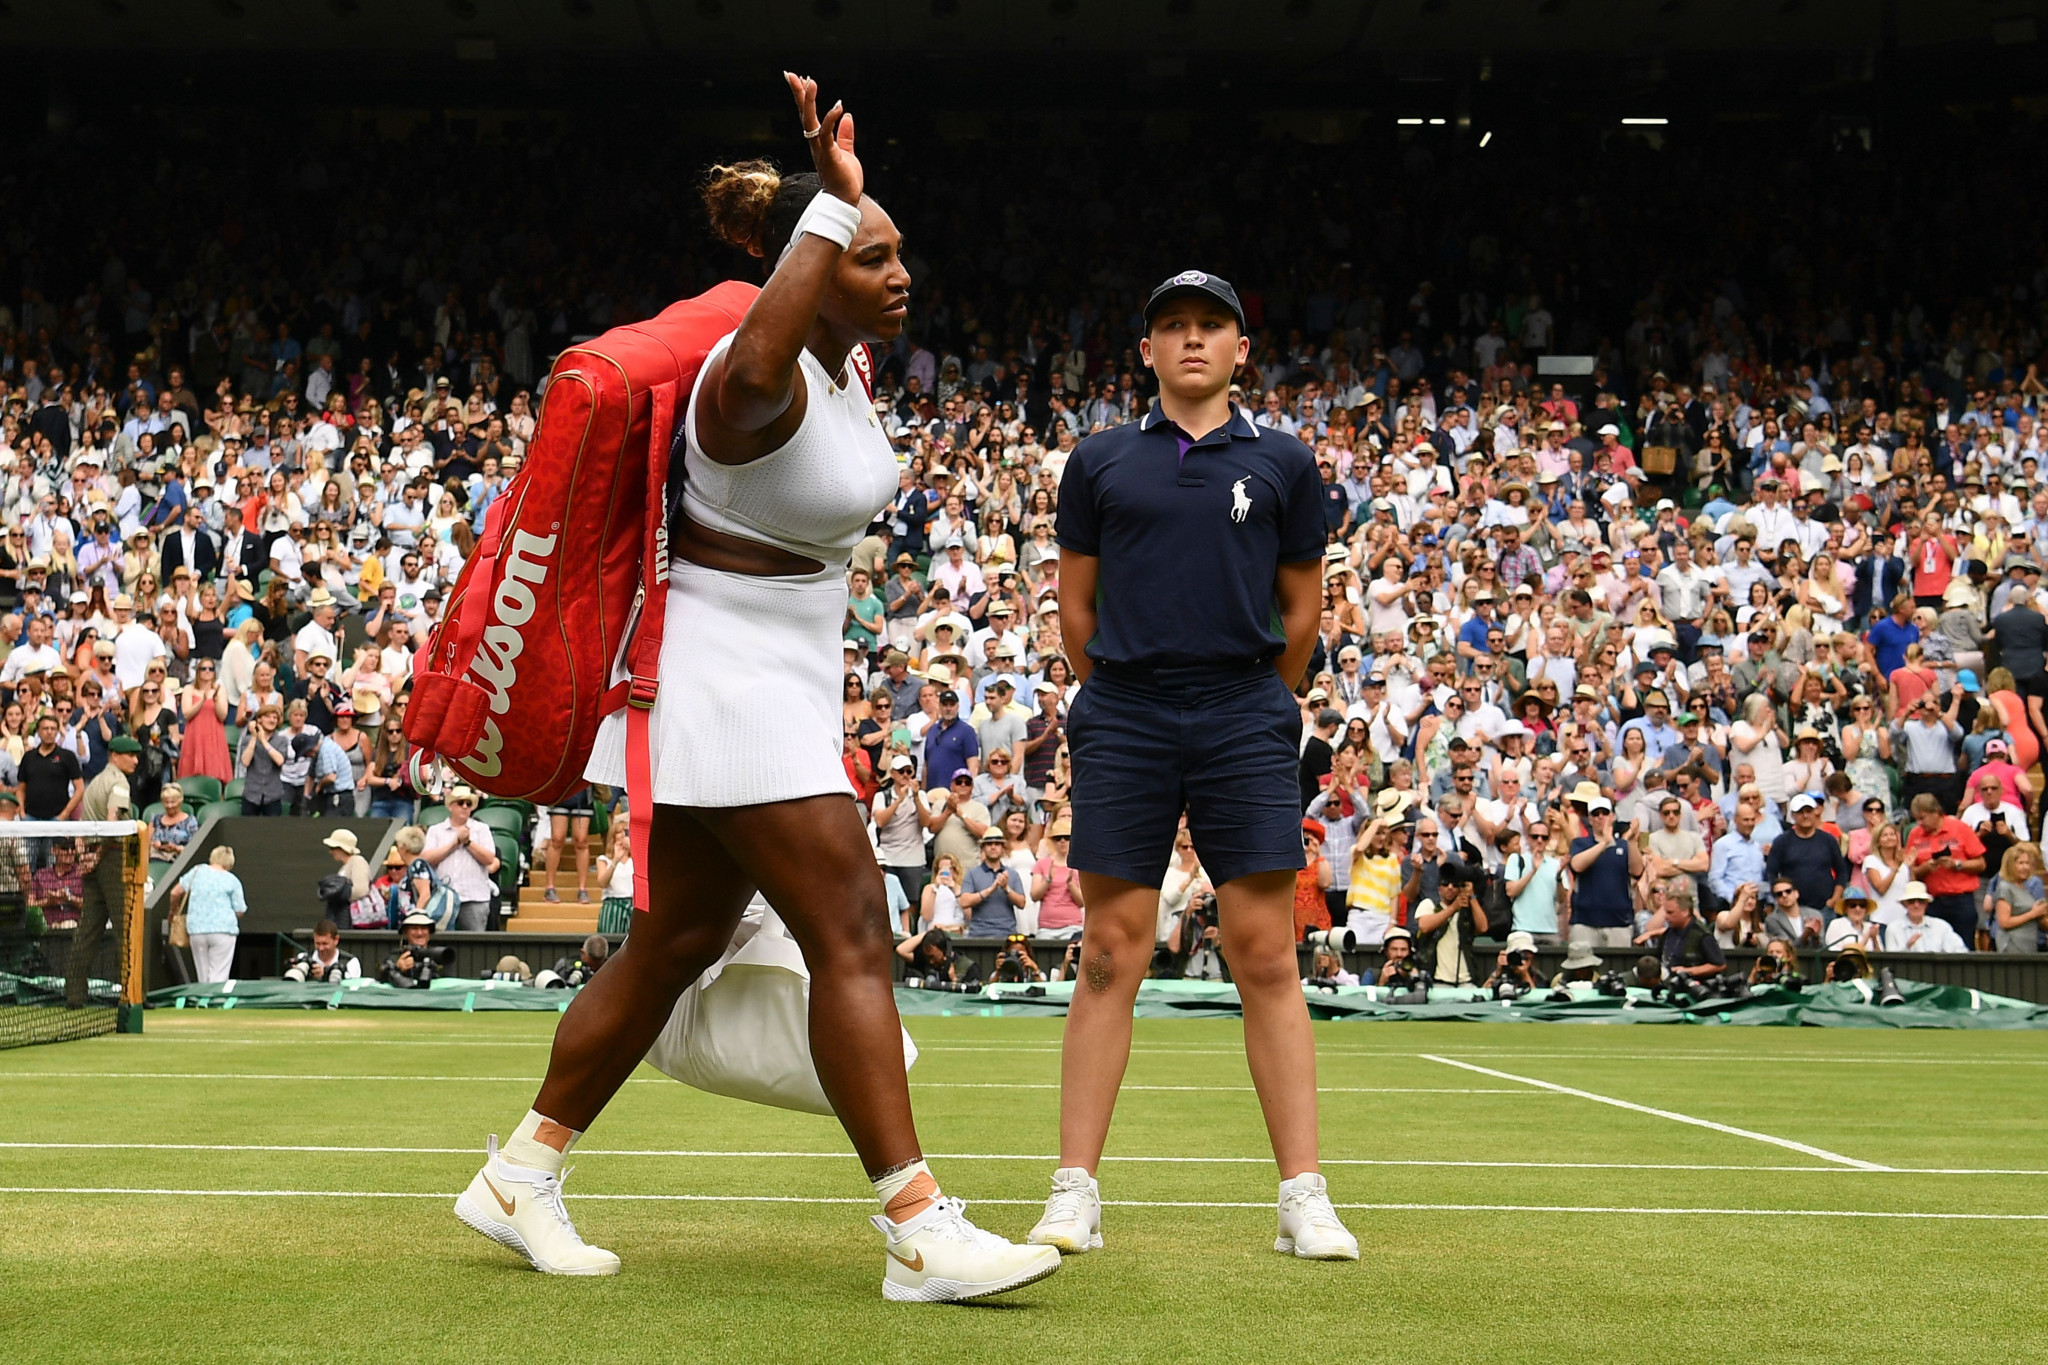 But her efforts ultimately proved to be in vain as Williams edged closer to a eighth Wimbledon title ©Getty Images